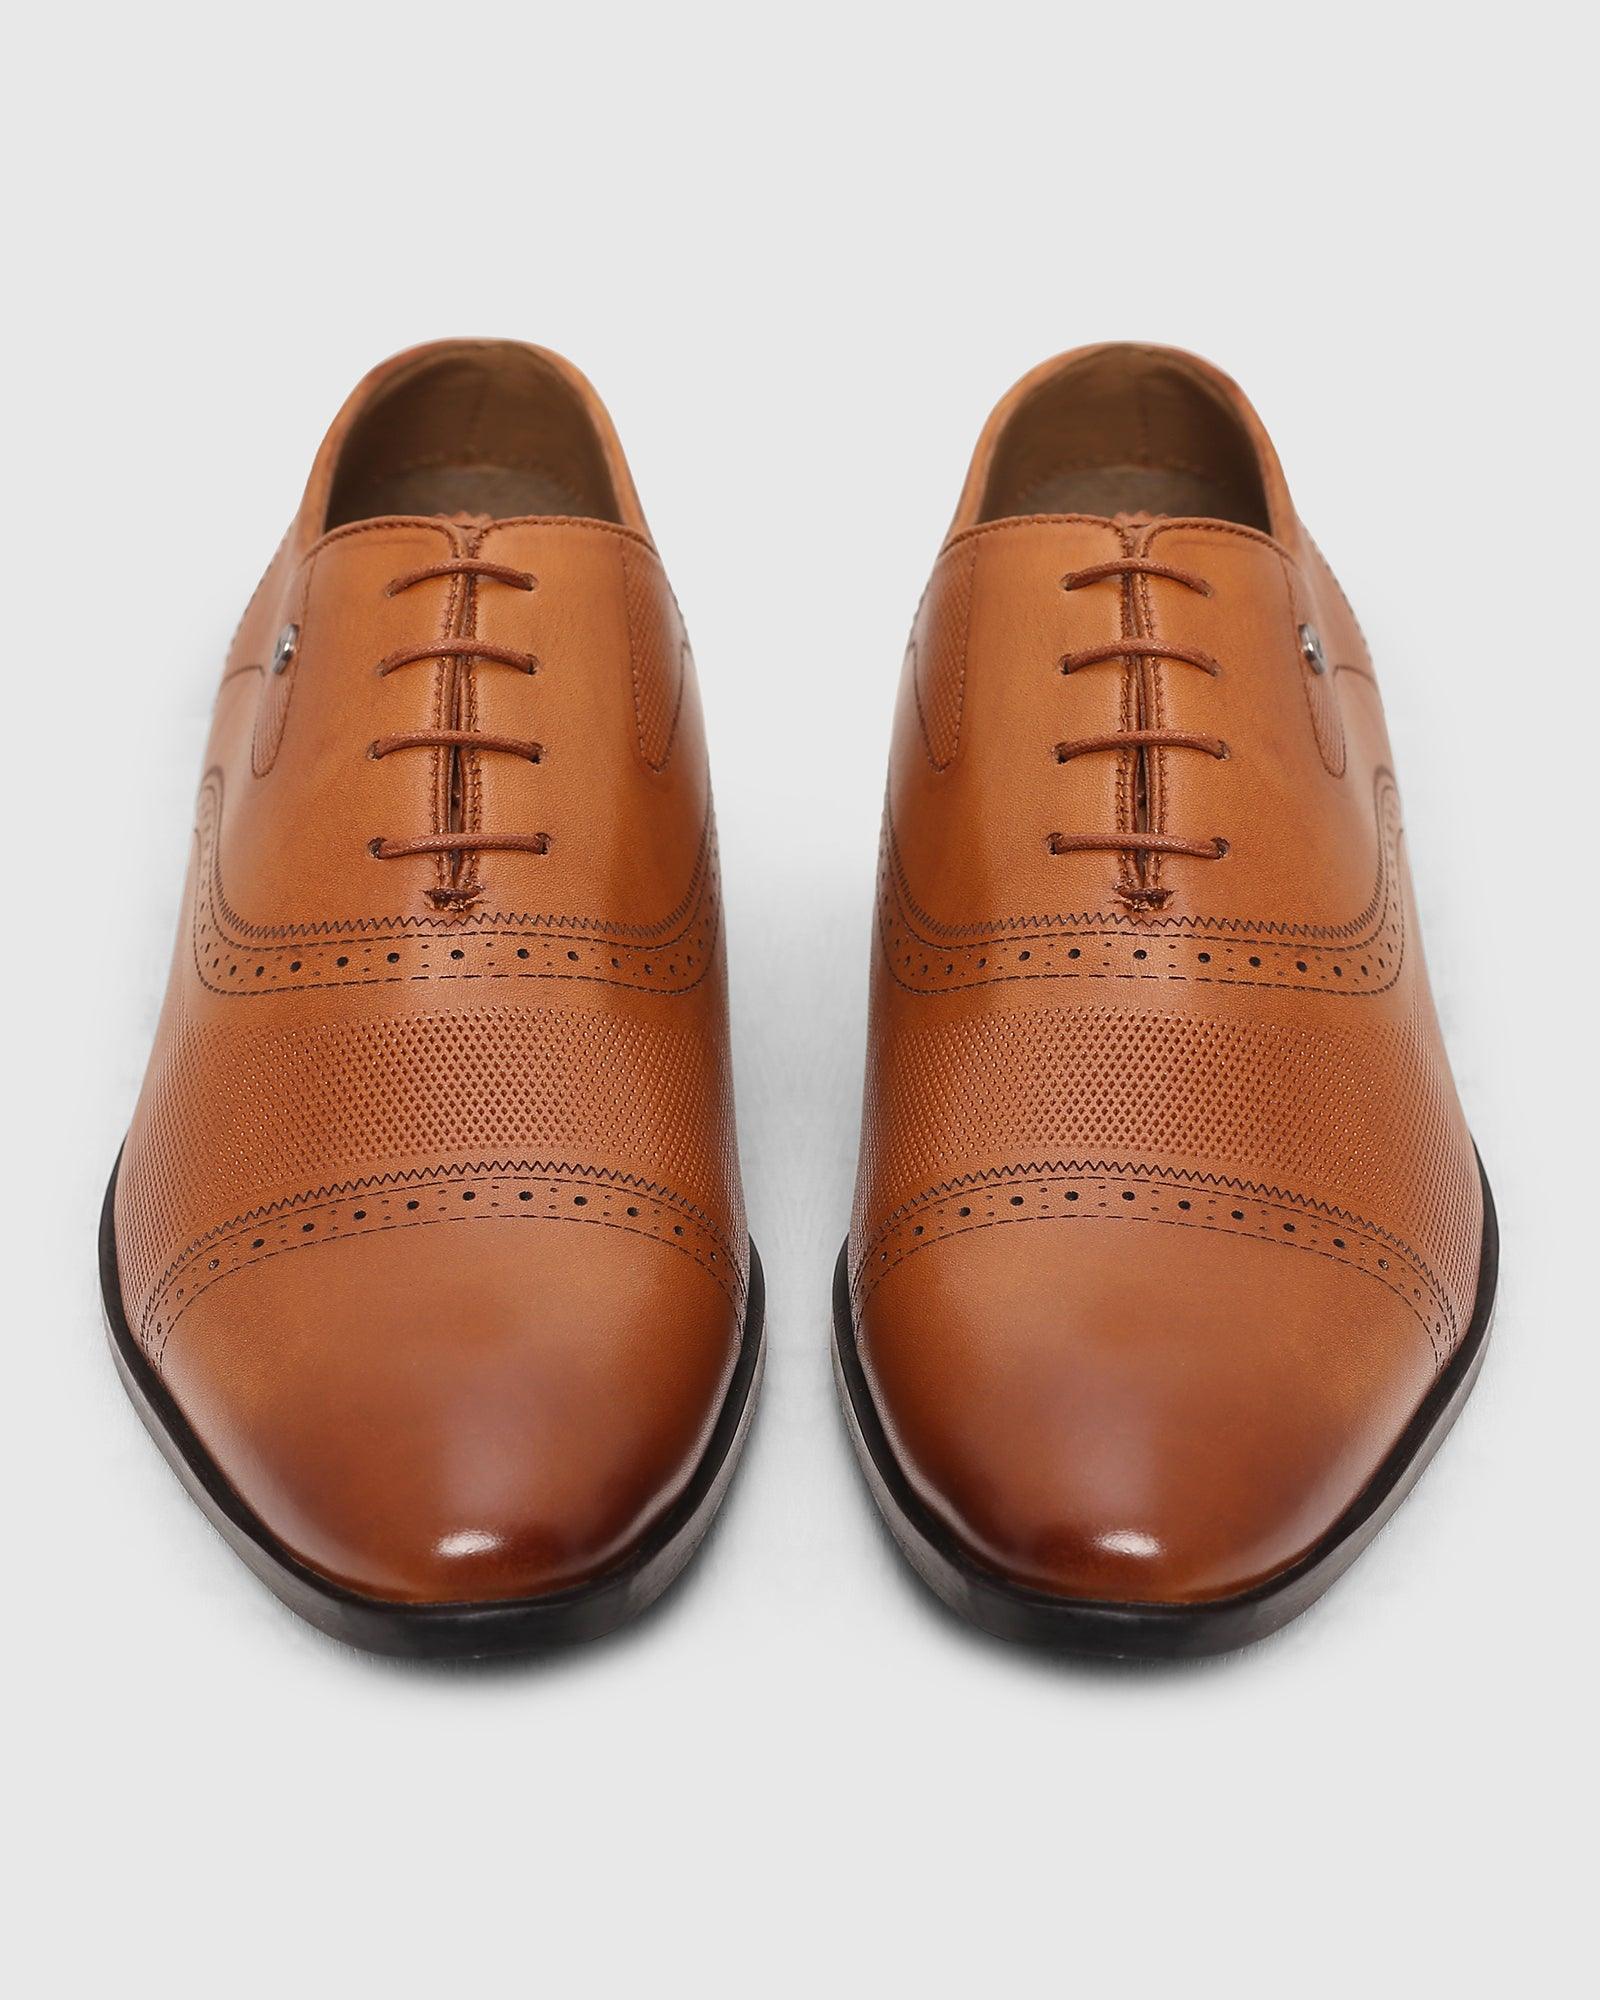 Must Haves Leather Tan Textured Oxford Shoes - Lewis